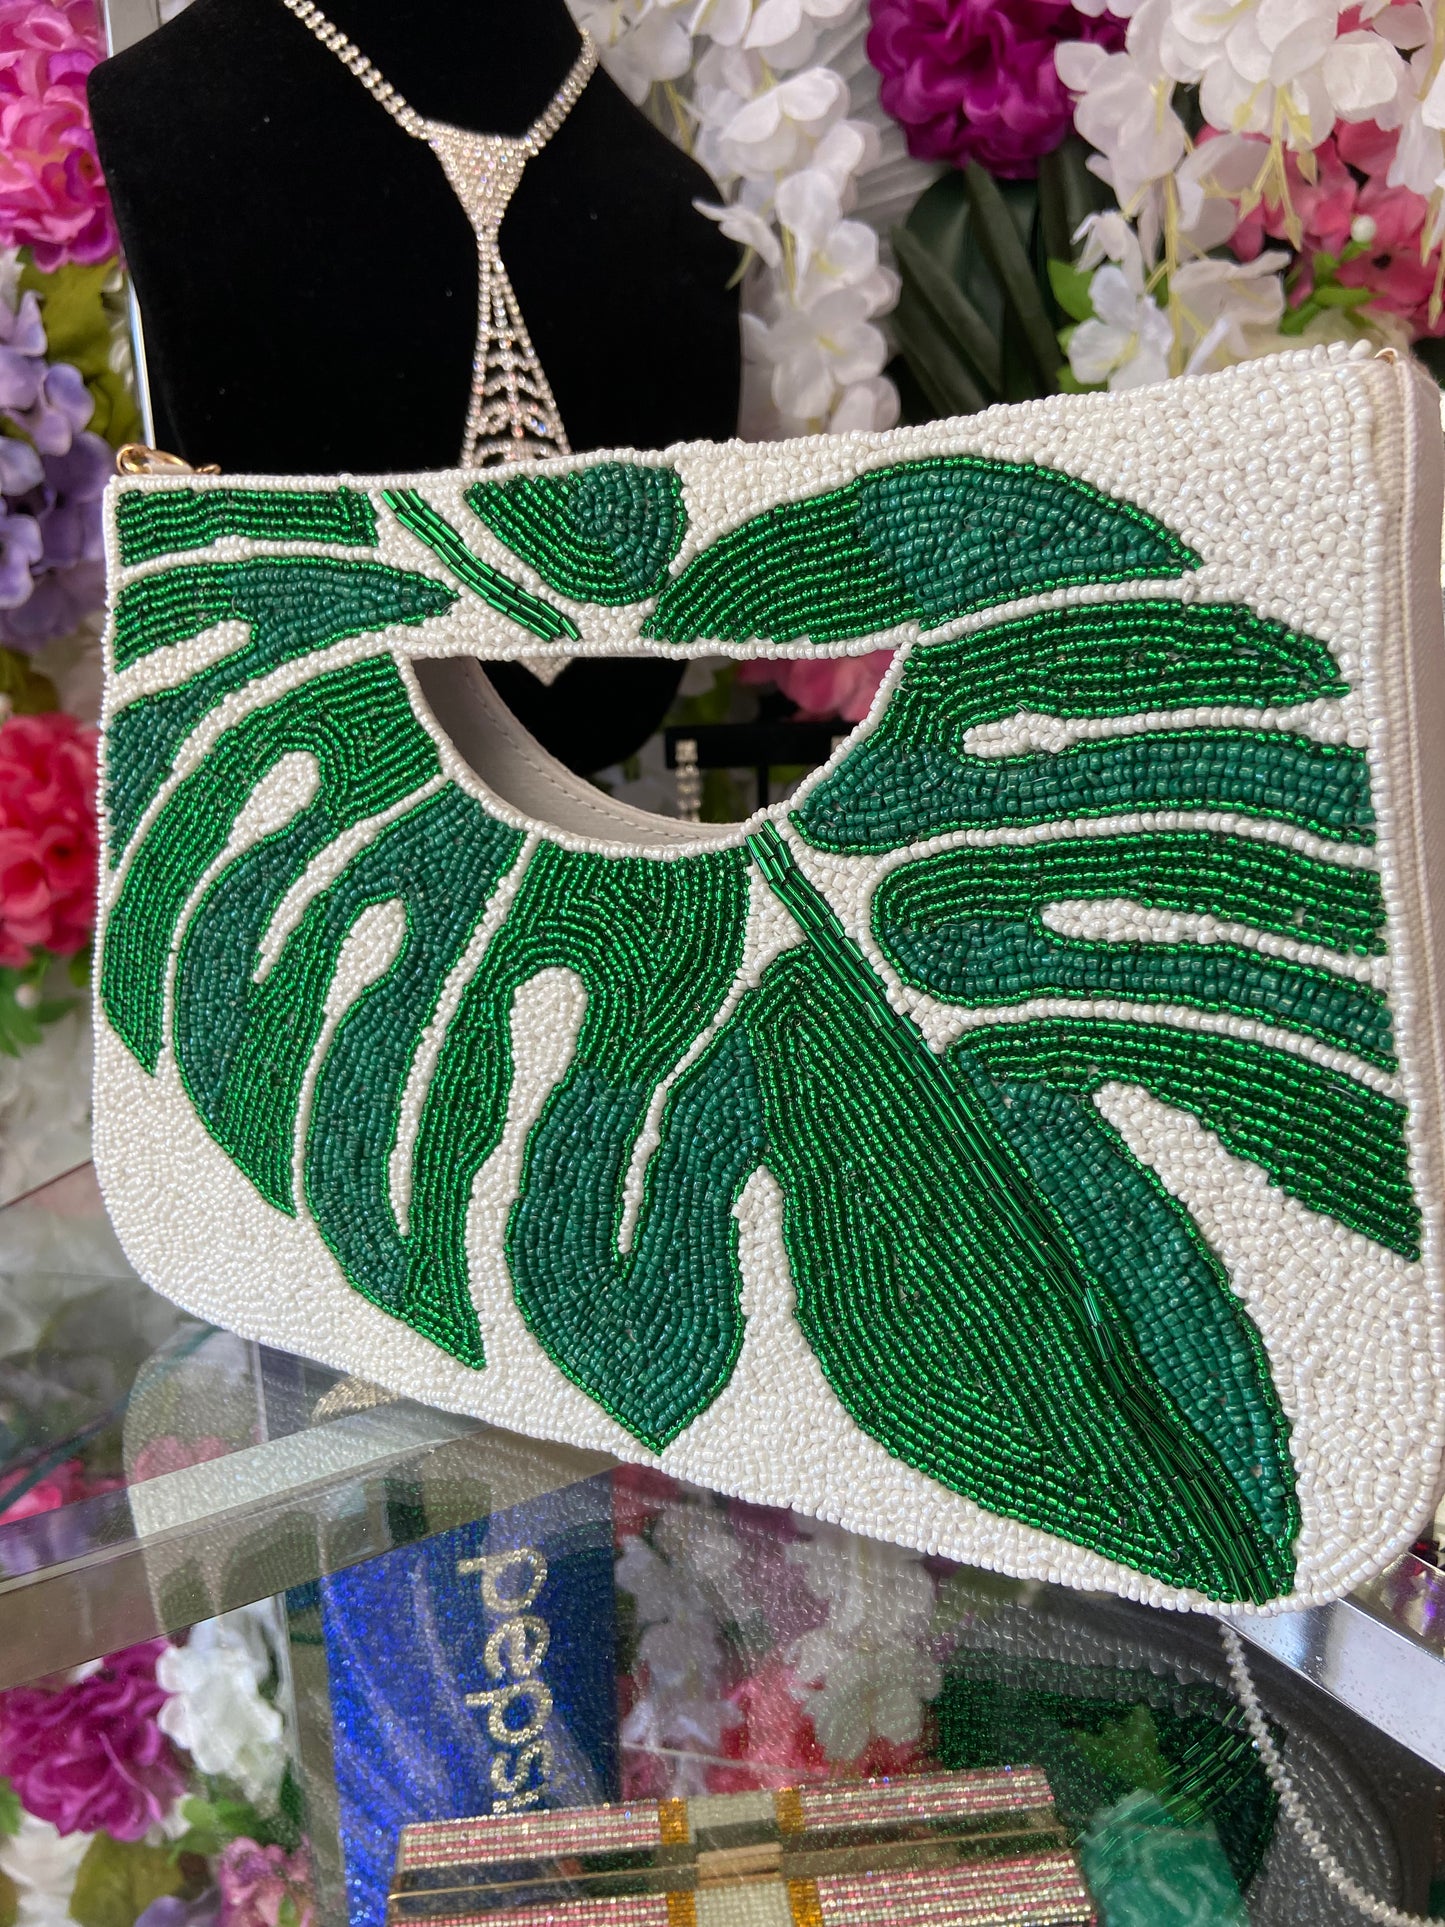 The Beaded Palm Springs Clutch